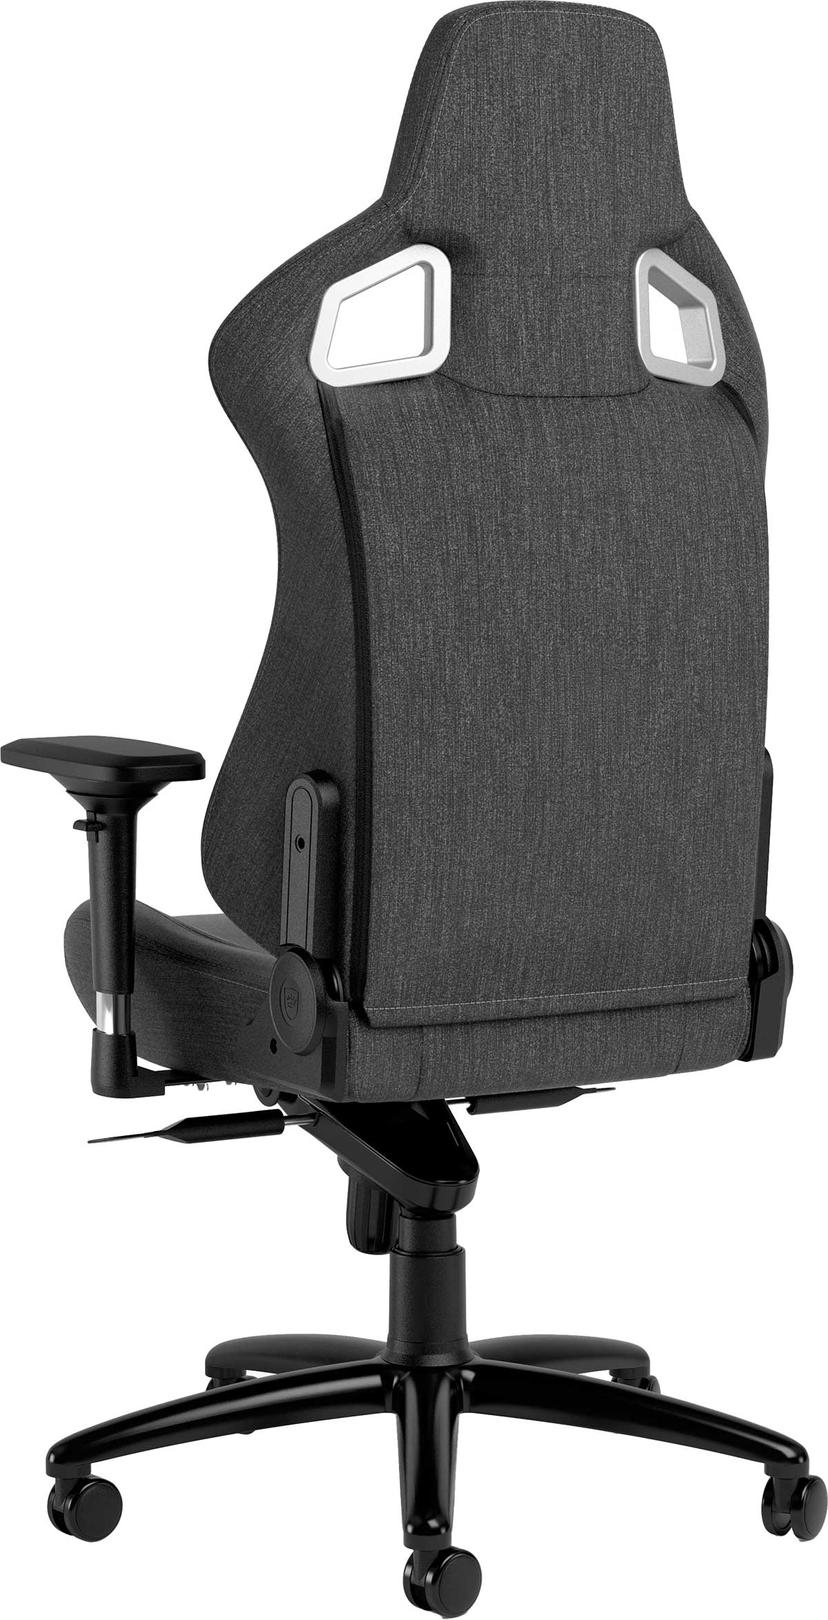 noblechairs Epic TX Anthracite